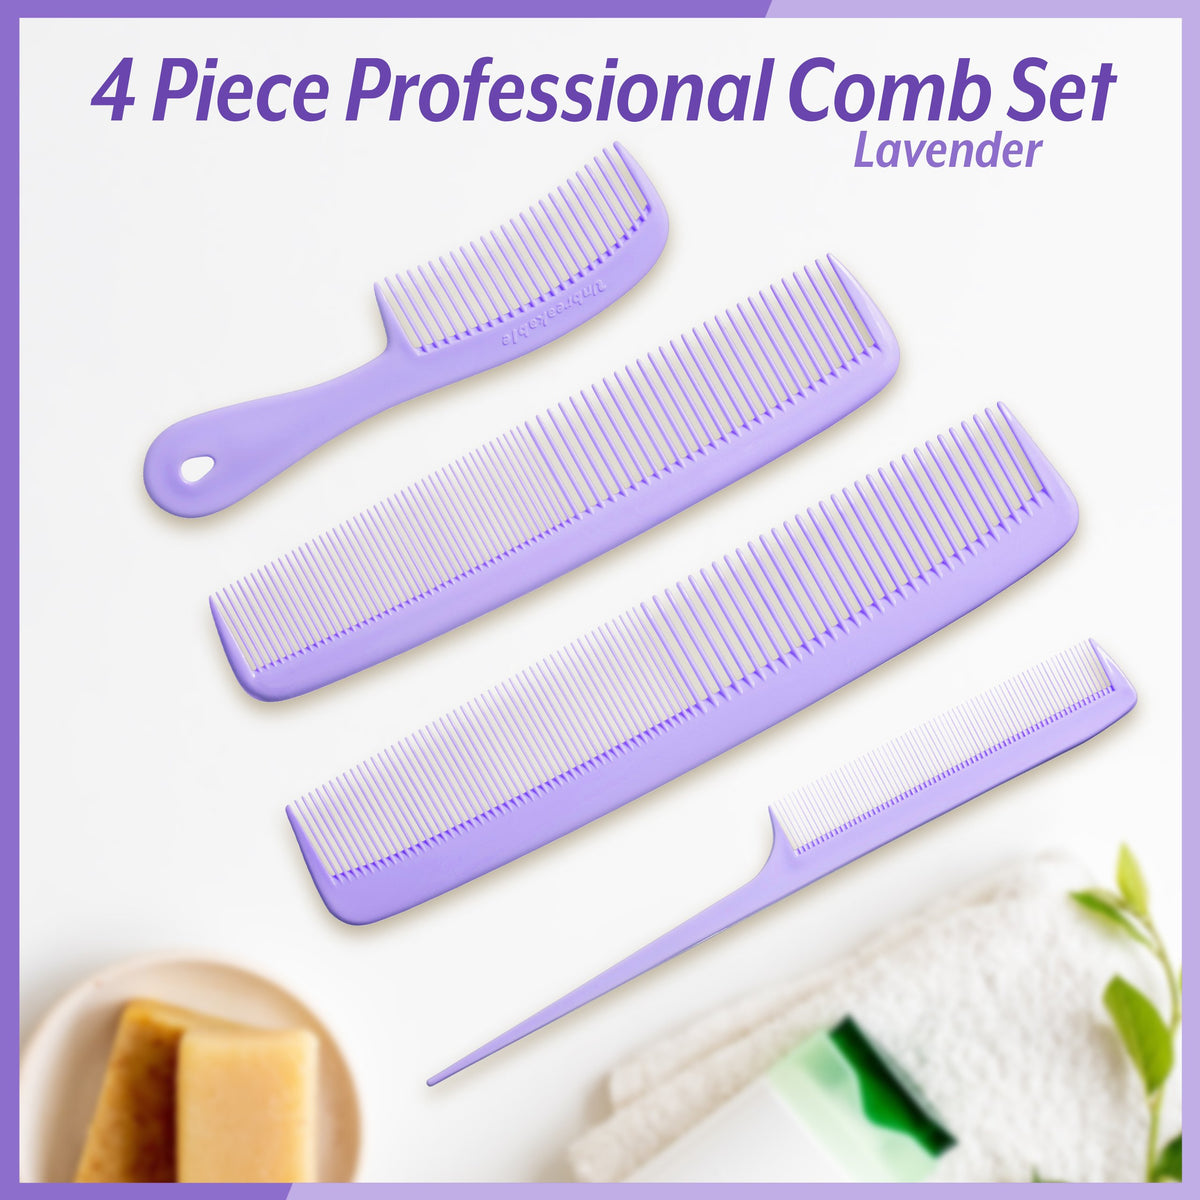 Mars Wellness 4 Piece Professional Comb Set - USA MADE - Fine Pro Tail Combs, Dresser Hair Comb Styling Comb - Premium Grade for Men and Women - Parting Teasing and Styling